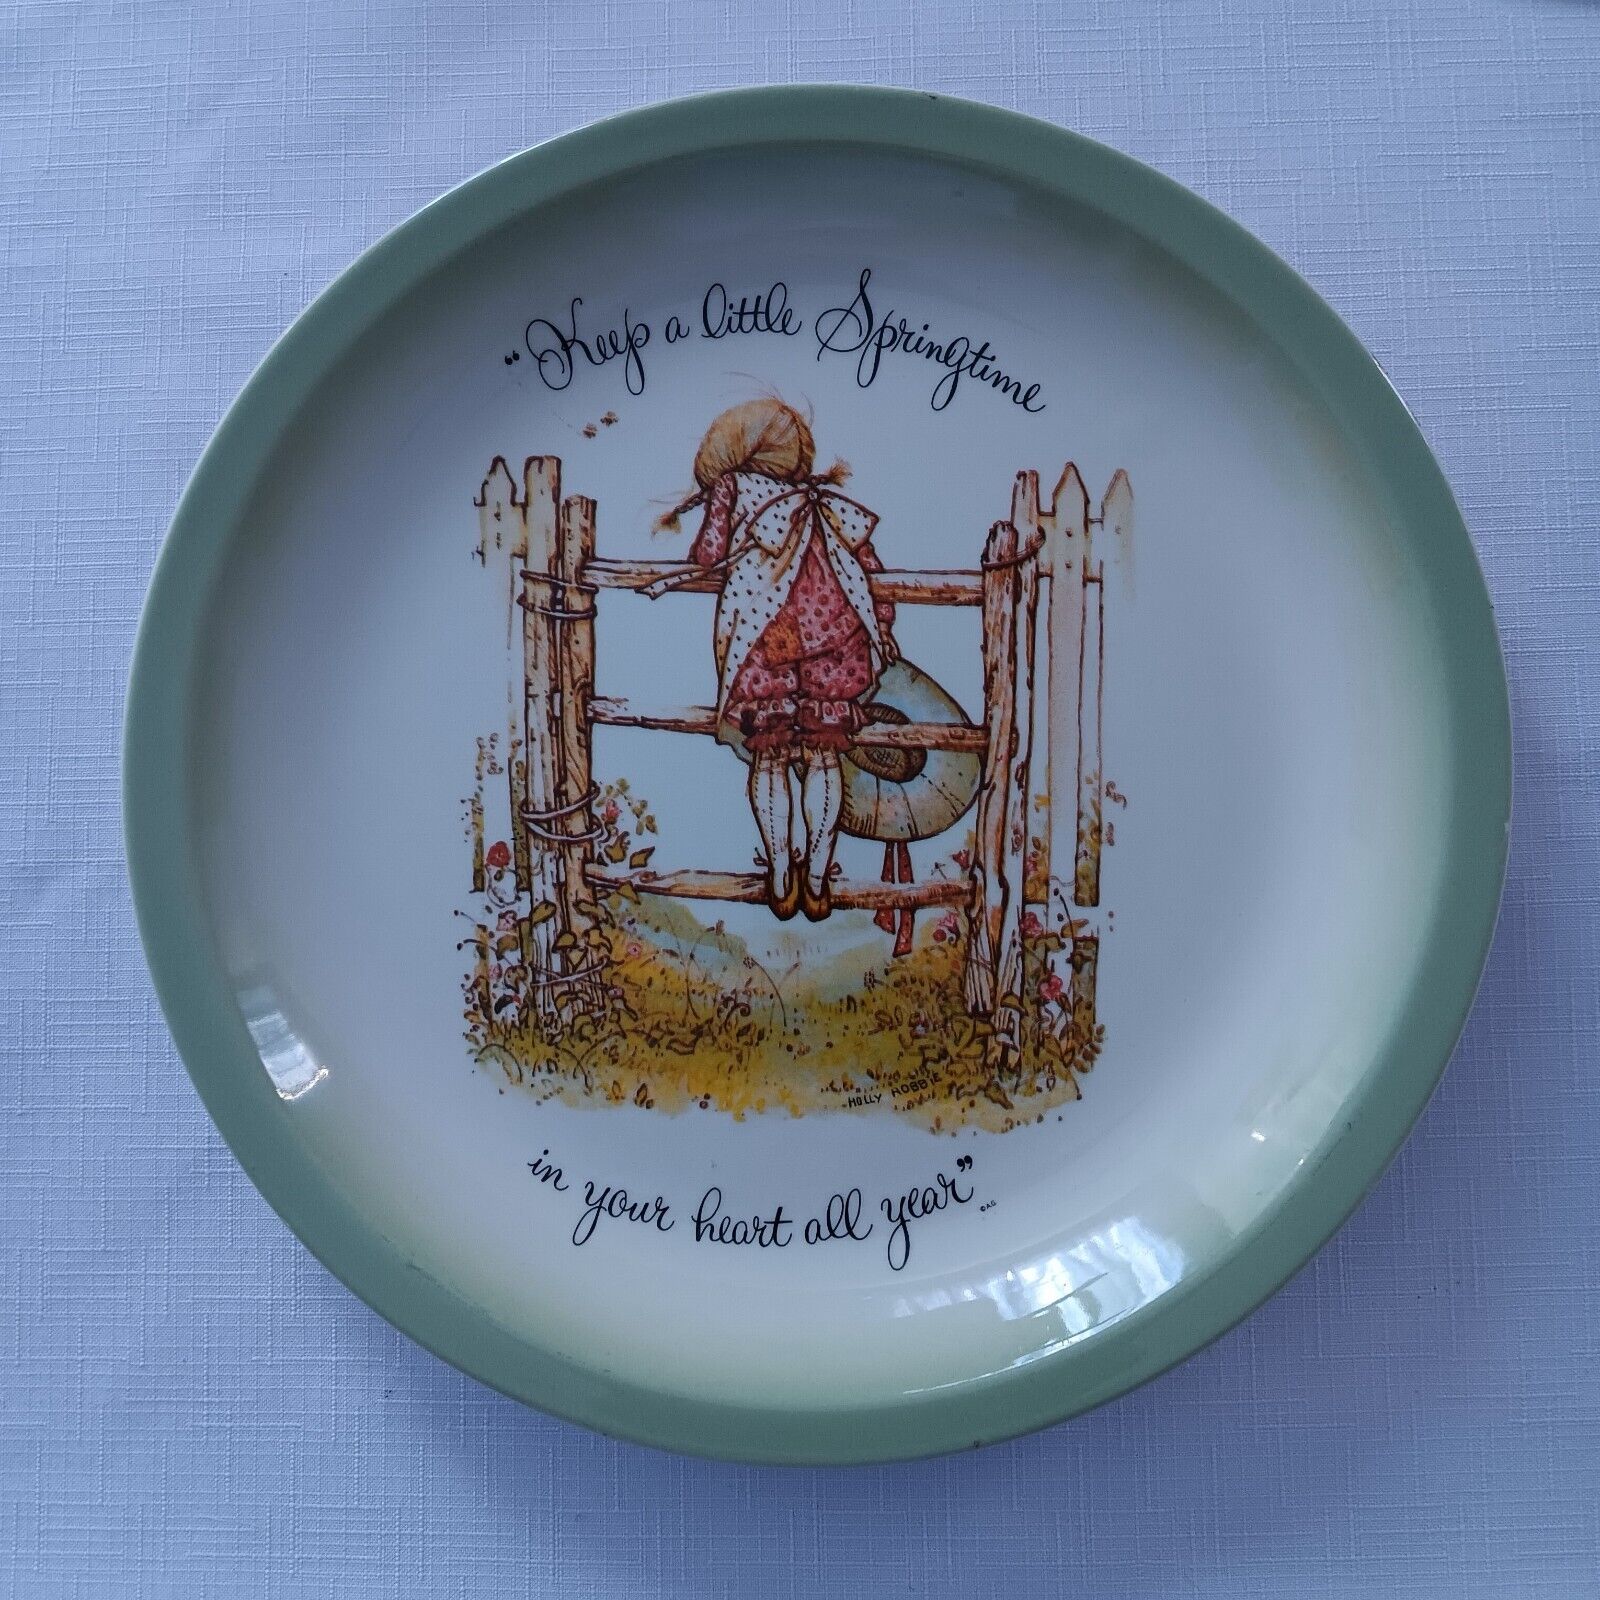 Vintage Holly Hobbie Plate 1972 -Keep a Little Springtime In your heart all year